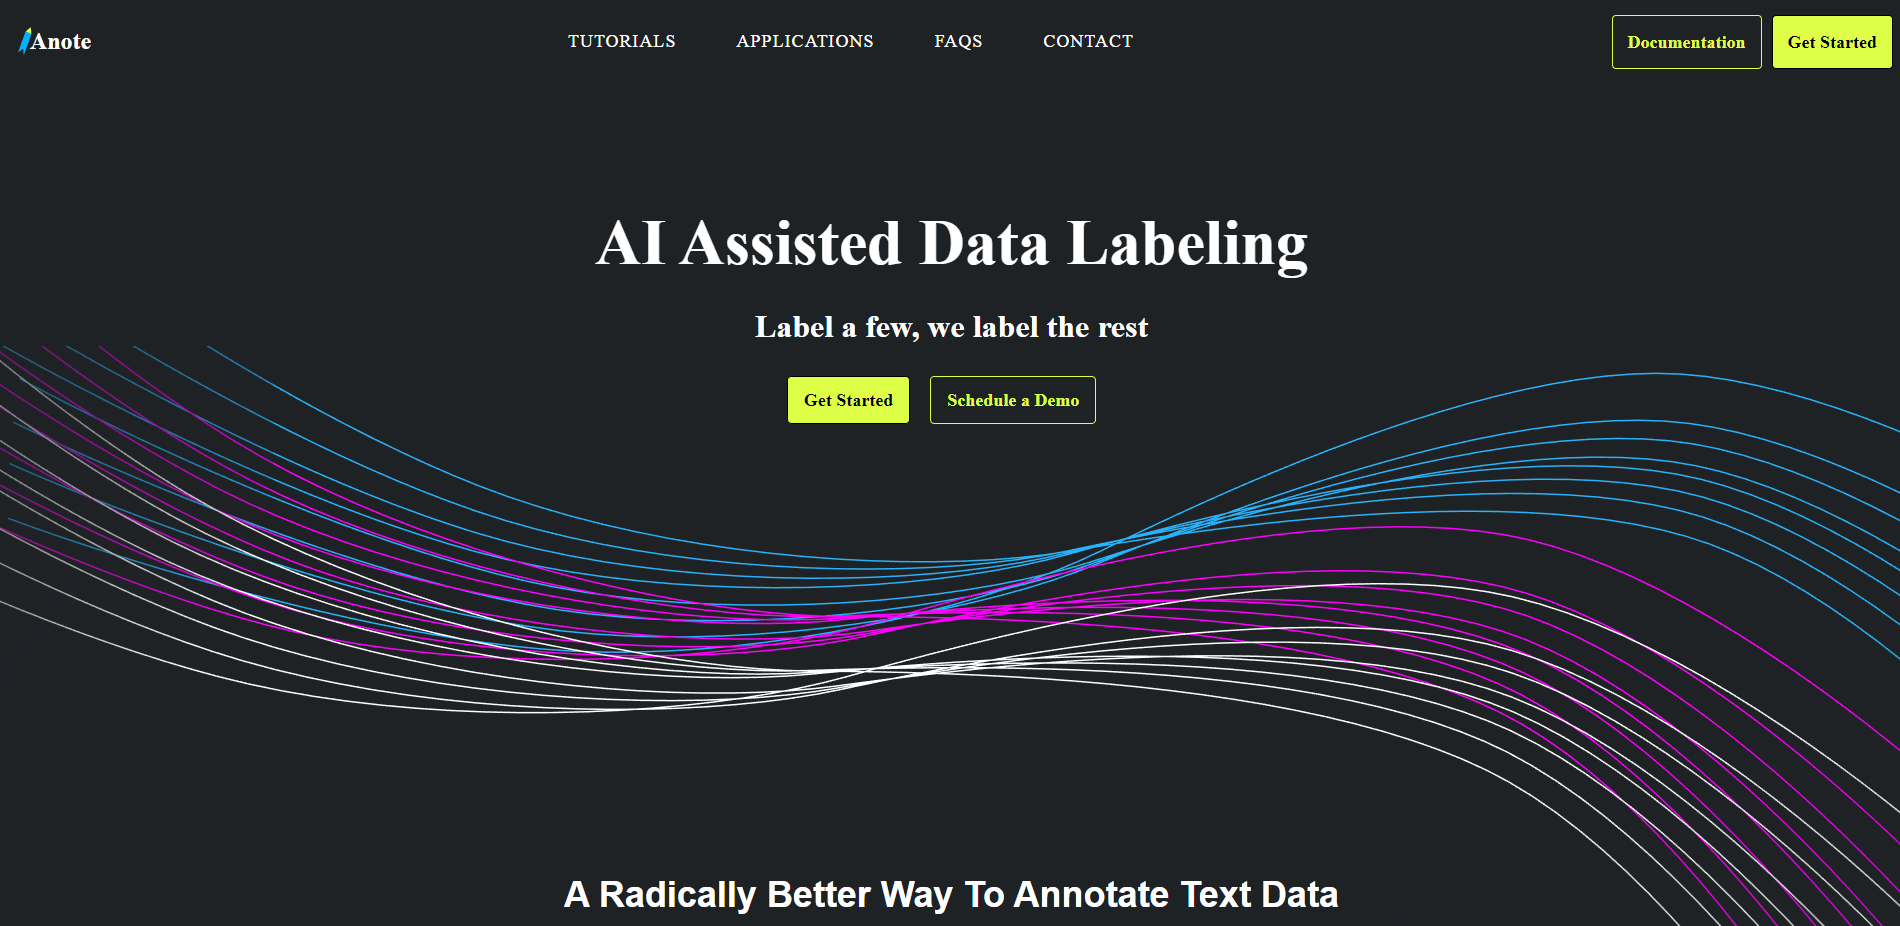 Anote - AI Assisted Data Labeling